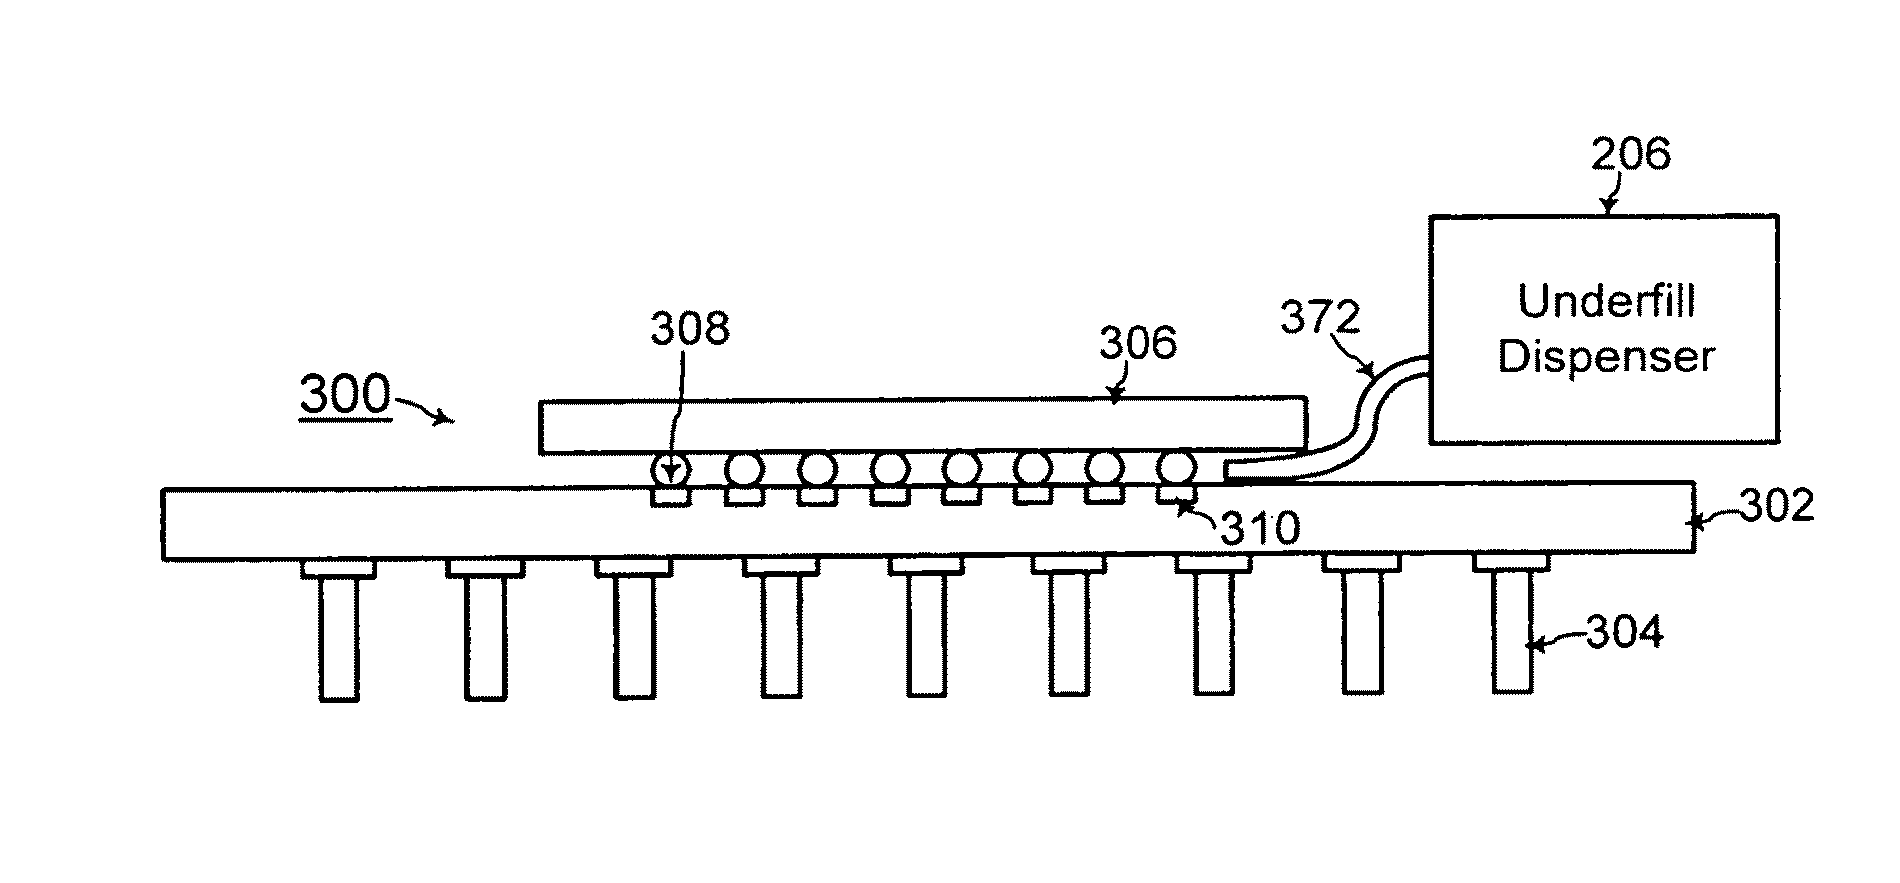 Inspection of underfill in integrated circuit package